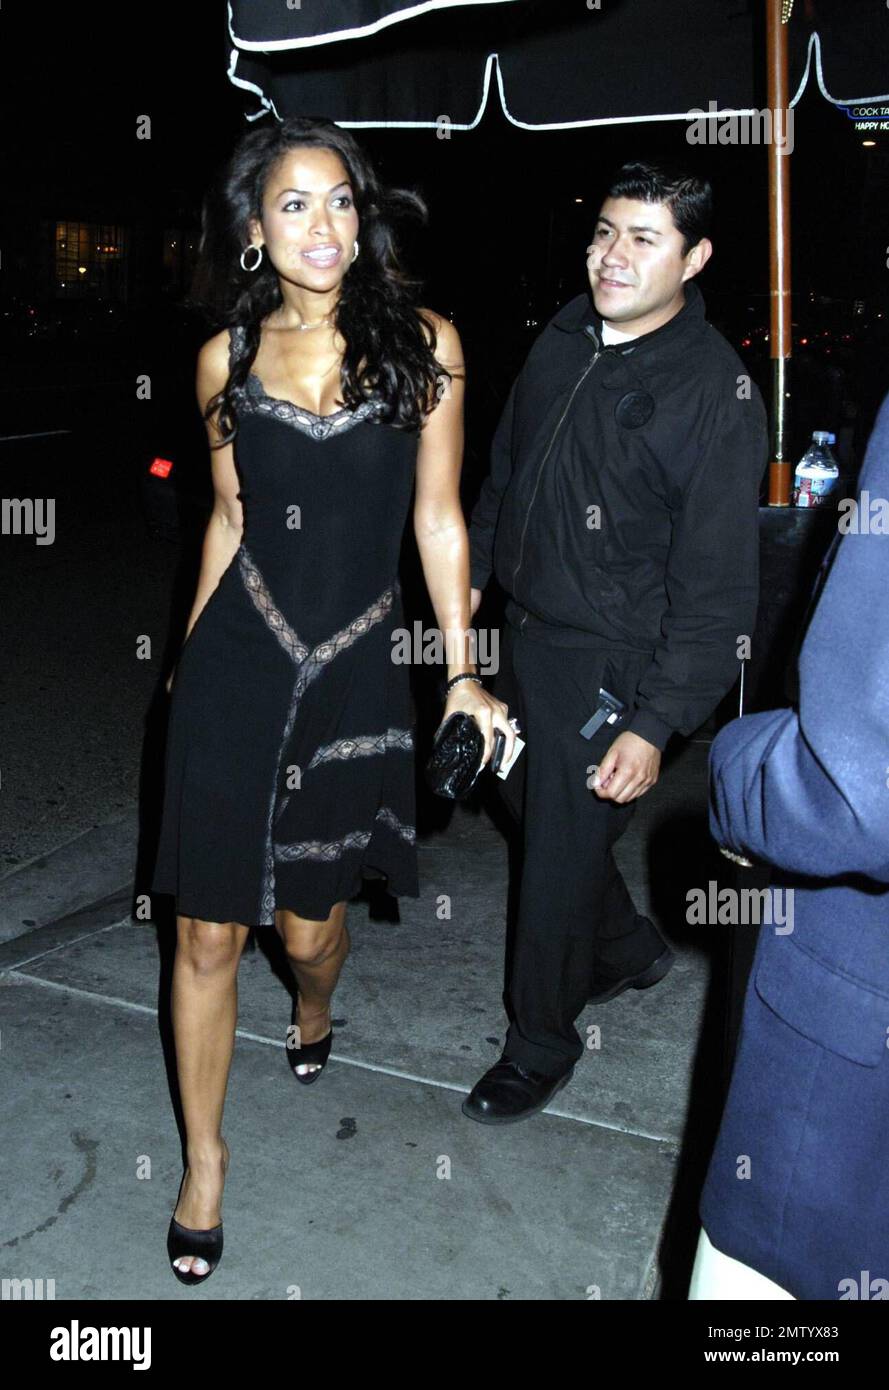 Record and movie producer Tracey Edmonds arrives at  STK restaurant in West Hollywood, CA. 3/25/08.  . Stock Photo